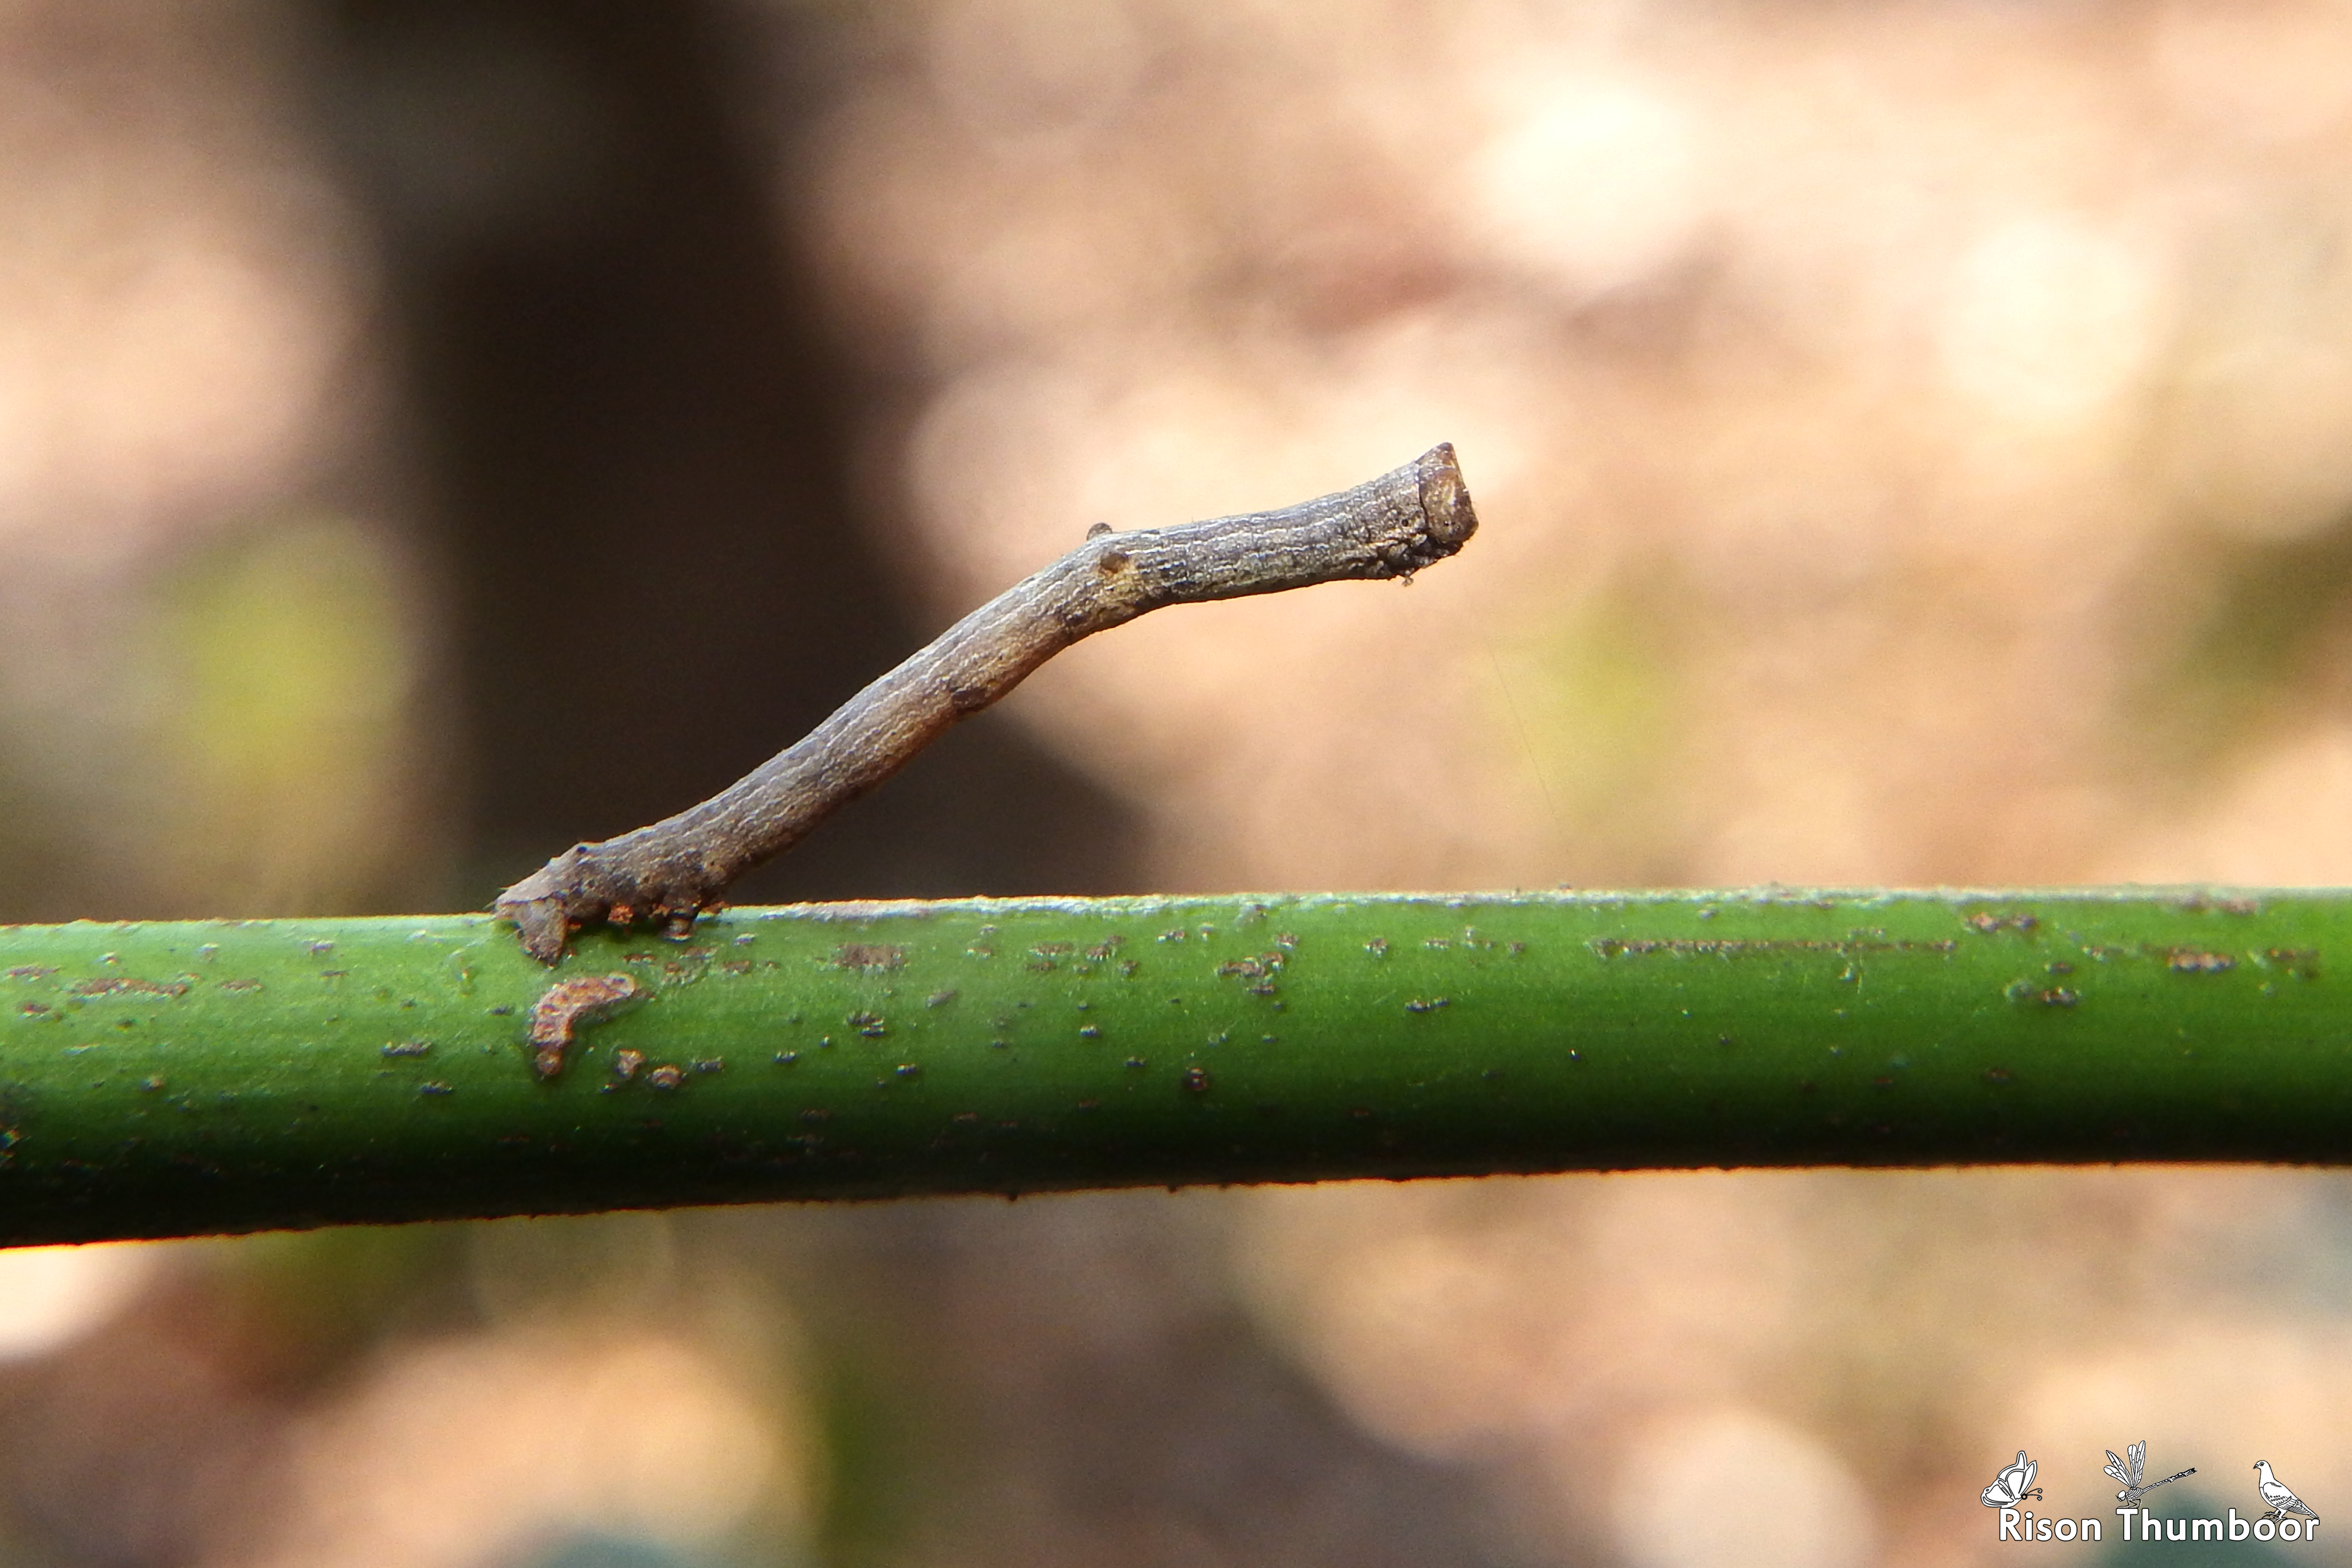 Photograph, Inch Worm Mimicking Twig